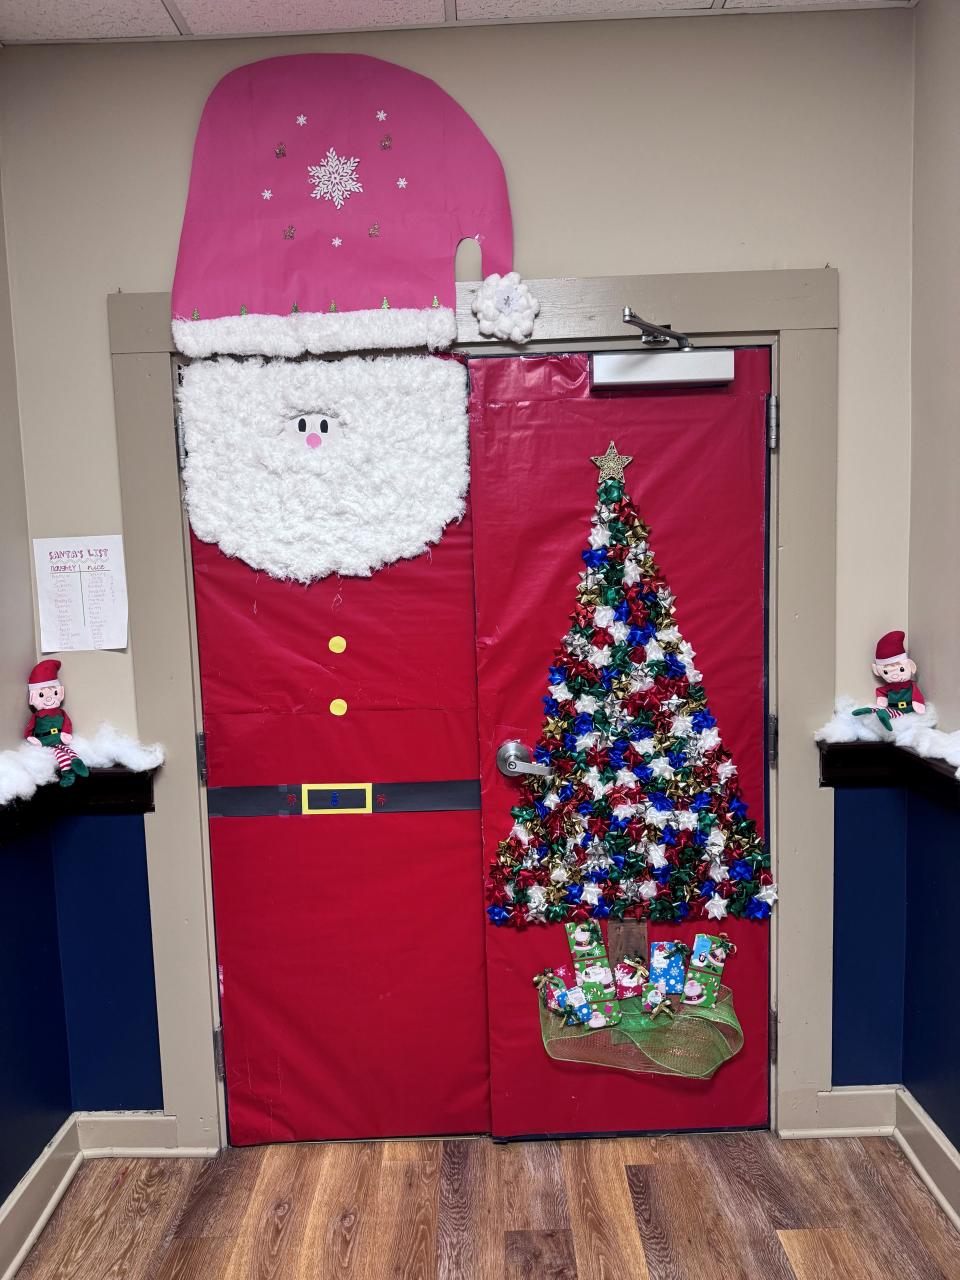 The kids have been enjoying a week of crafts and fun with their door decorating contest, going all out on their creative ideas. The girls door uses every inch to create a Santa Claus.